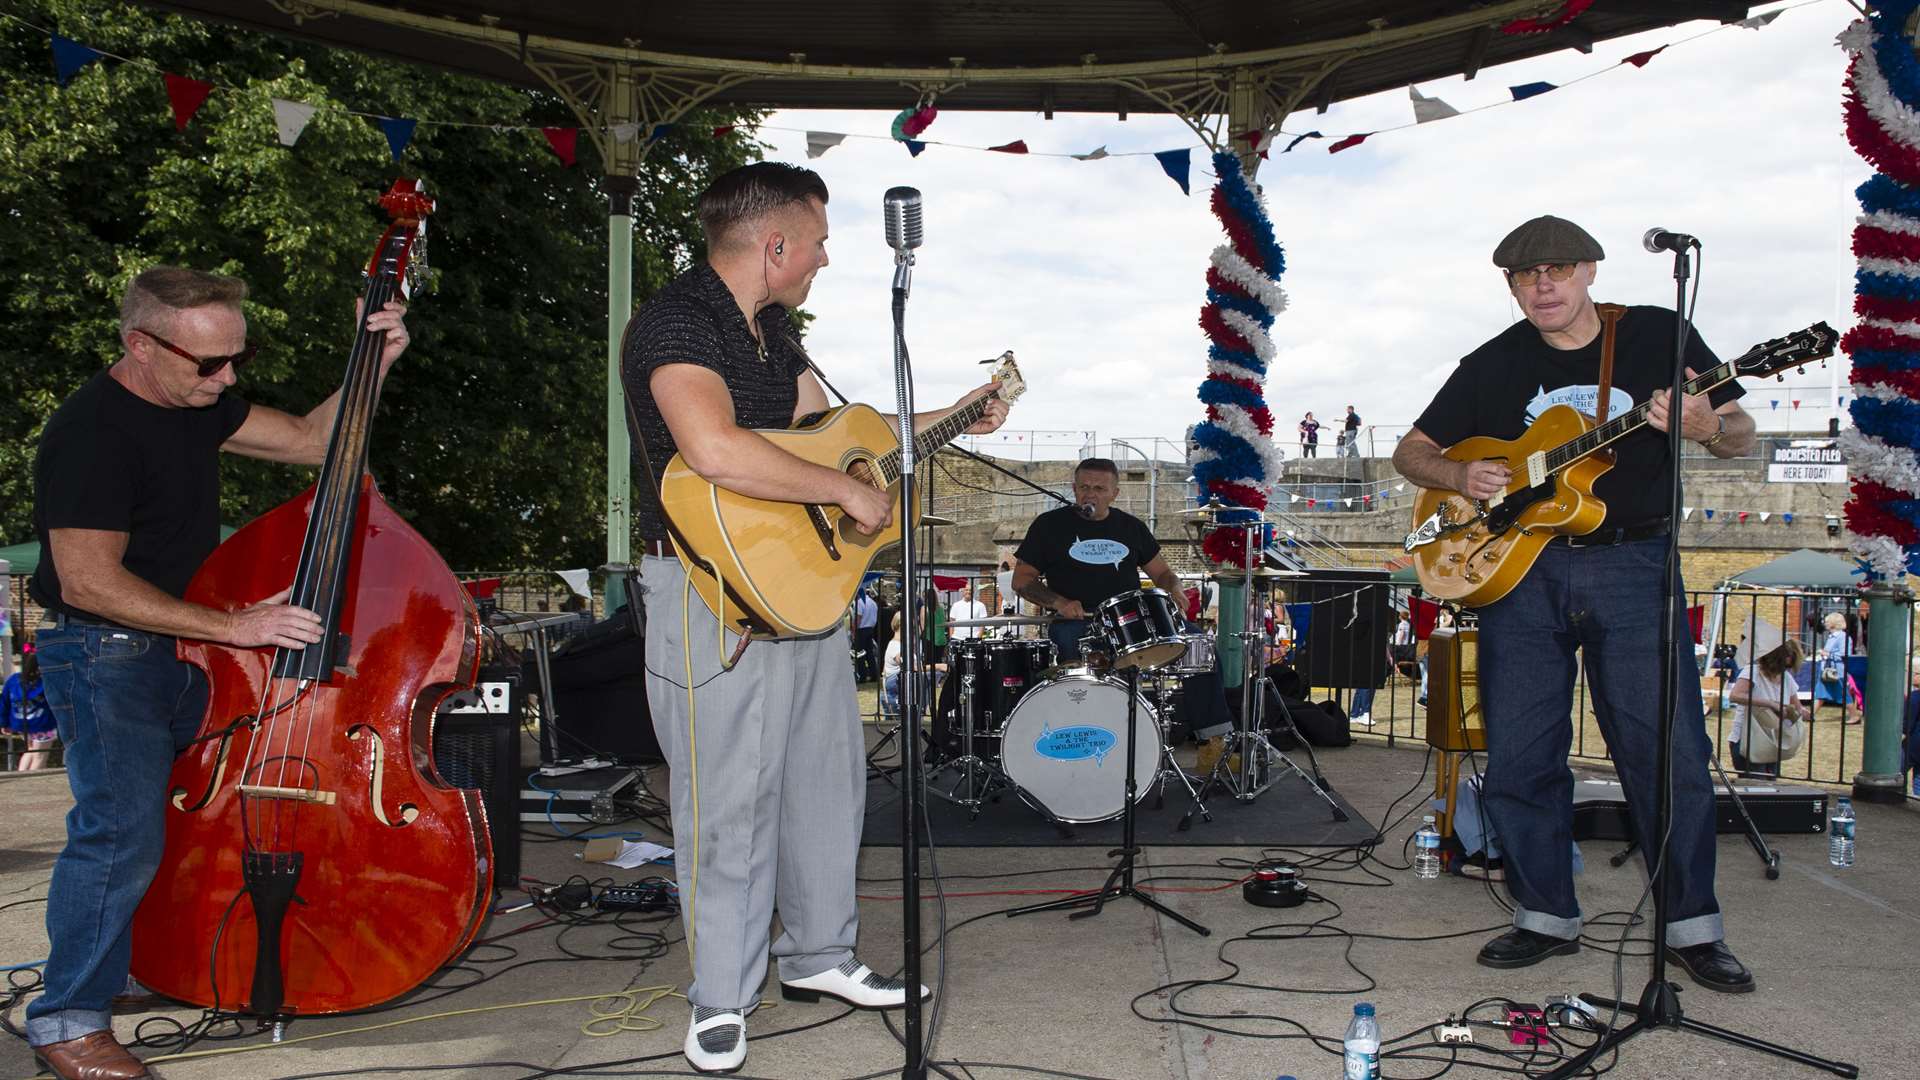 Lew Lewis and Twilight Trio perform on the bandstand at the Summer Fayre on the Square in the Fort Gardens, Gravesend